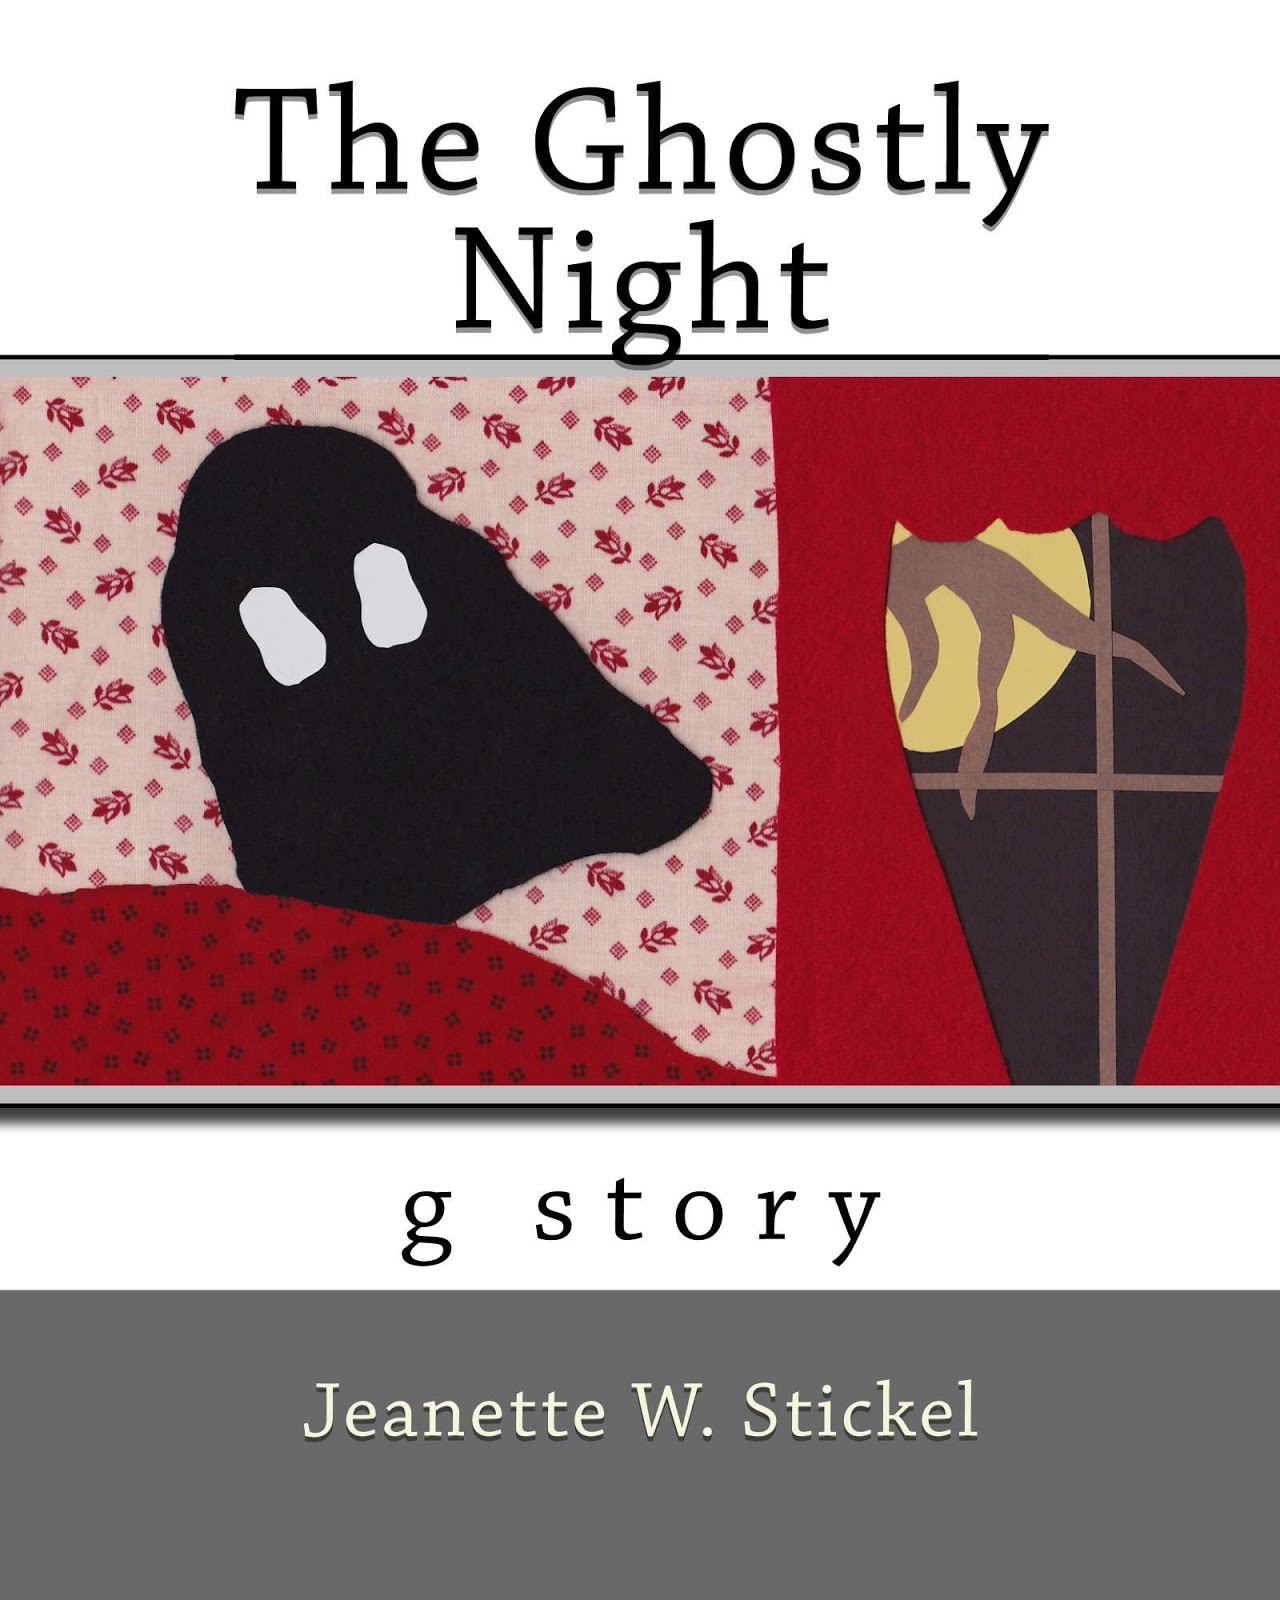 The Ghostly Night